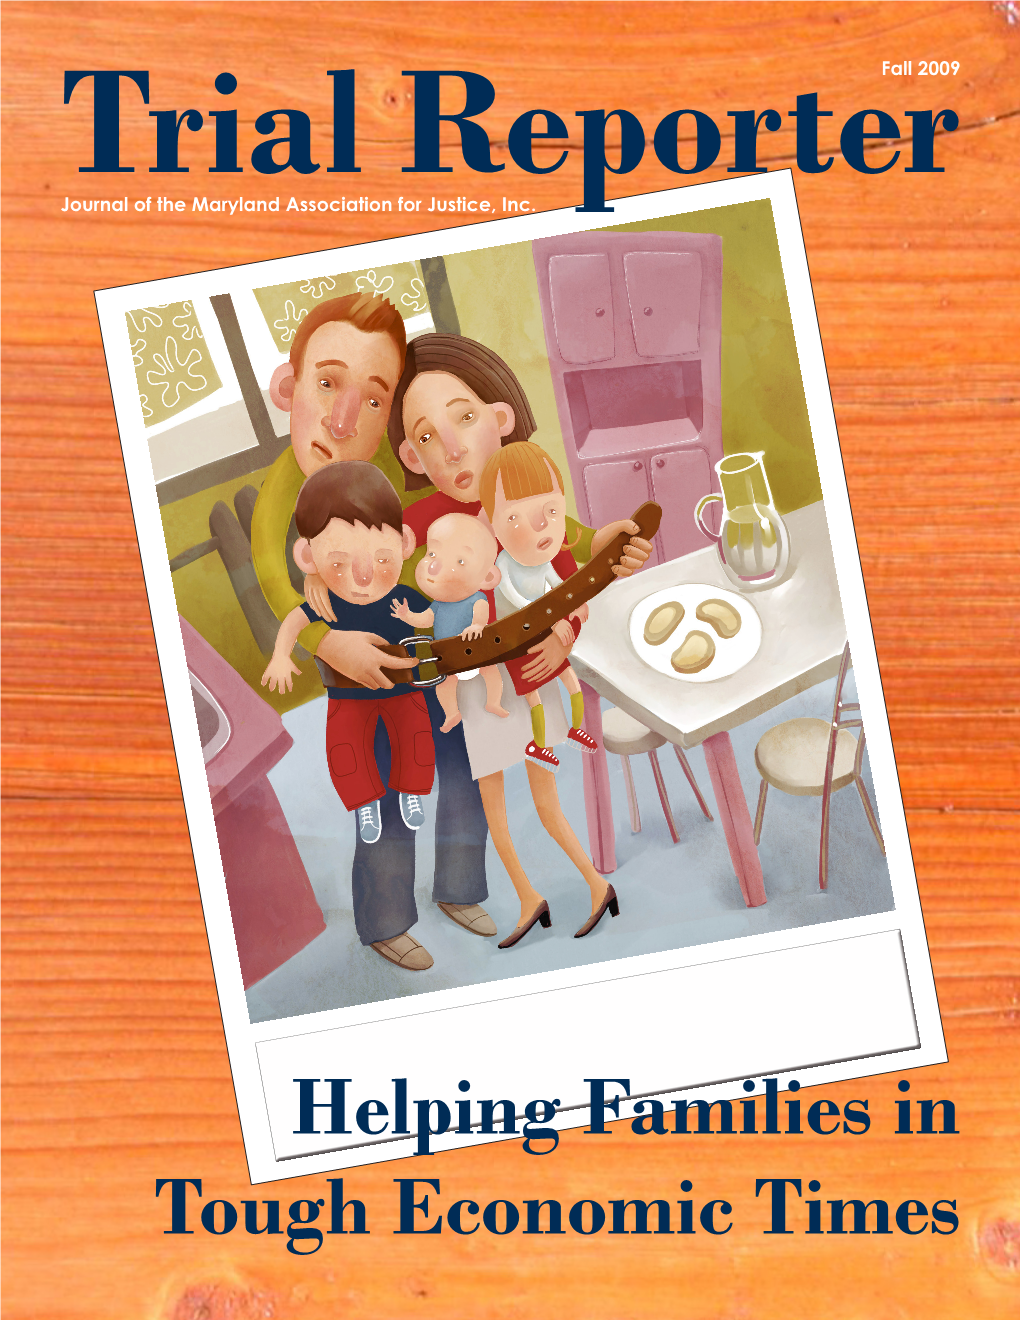 Helping Families in Tough Economic Times